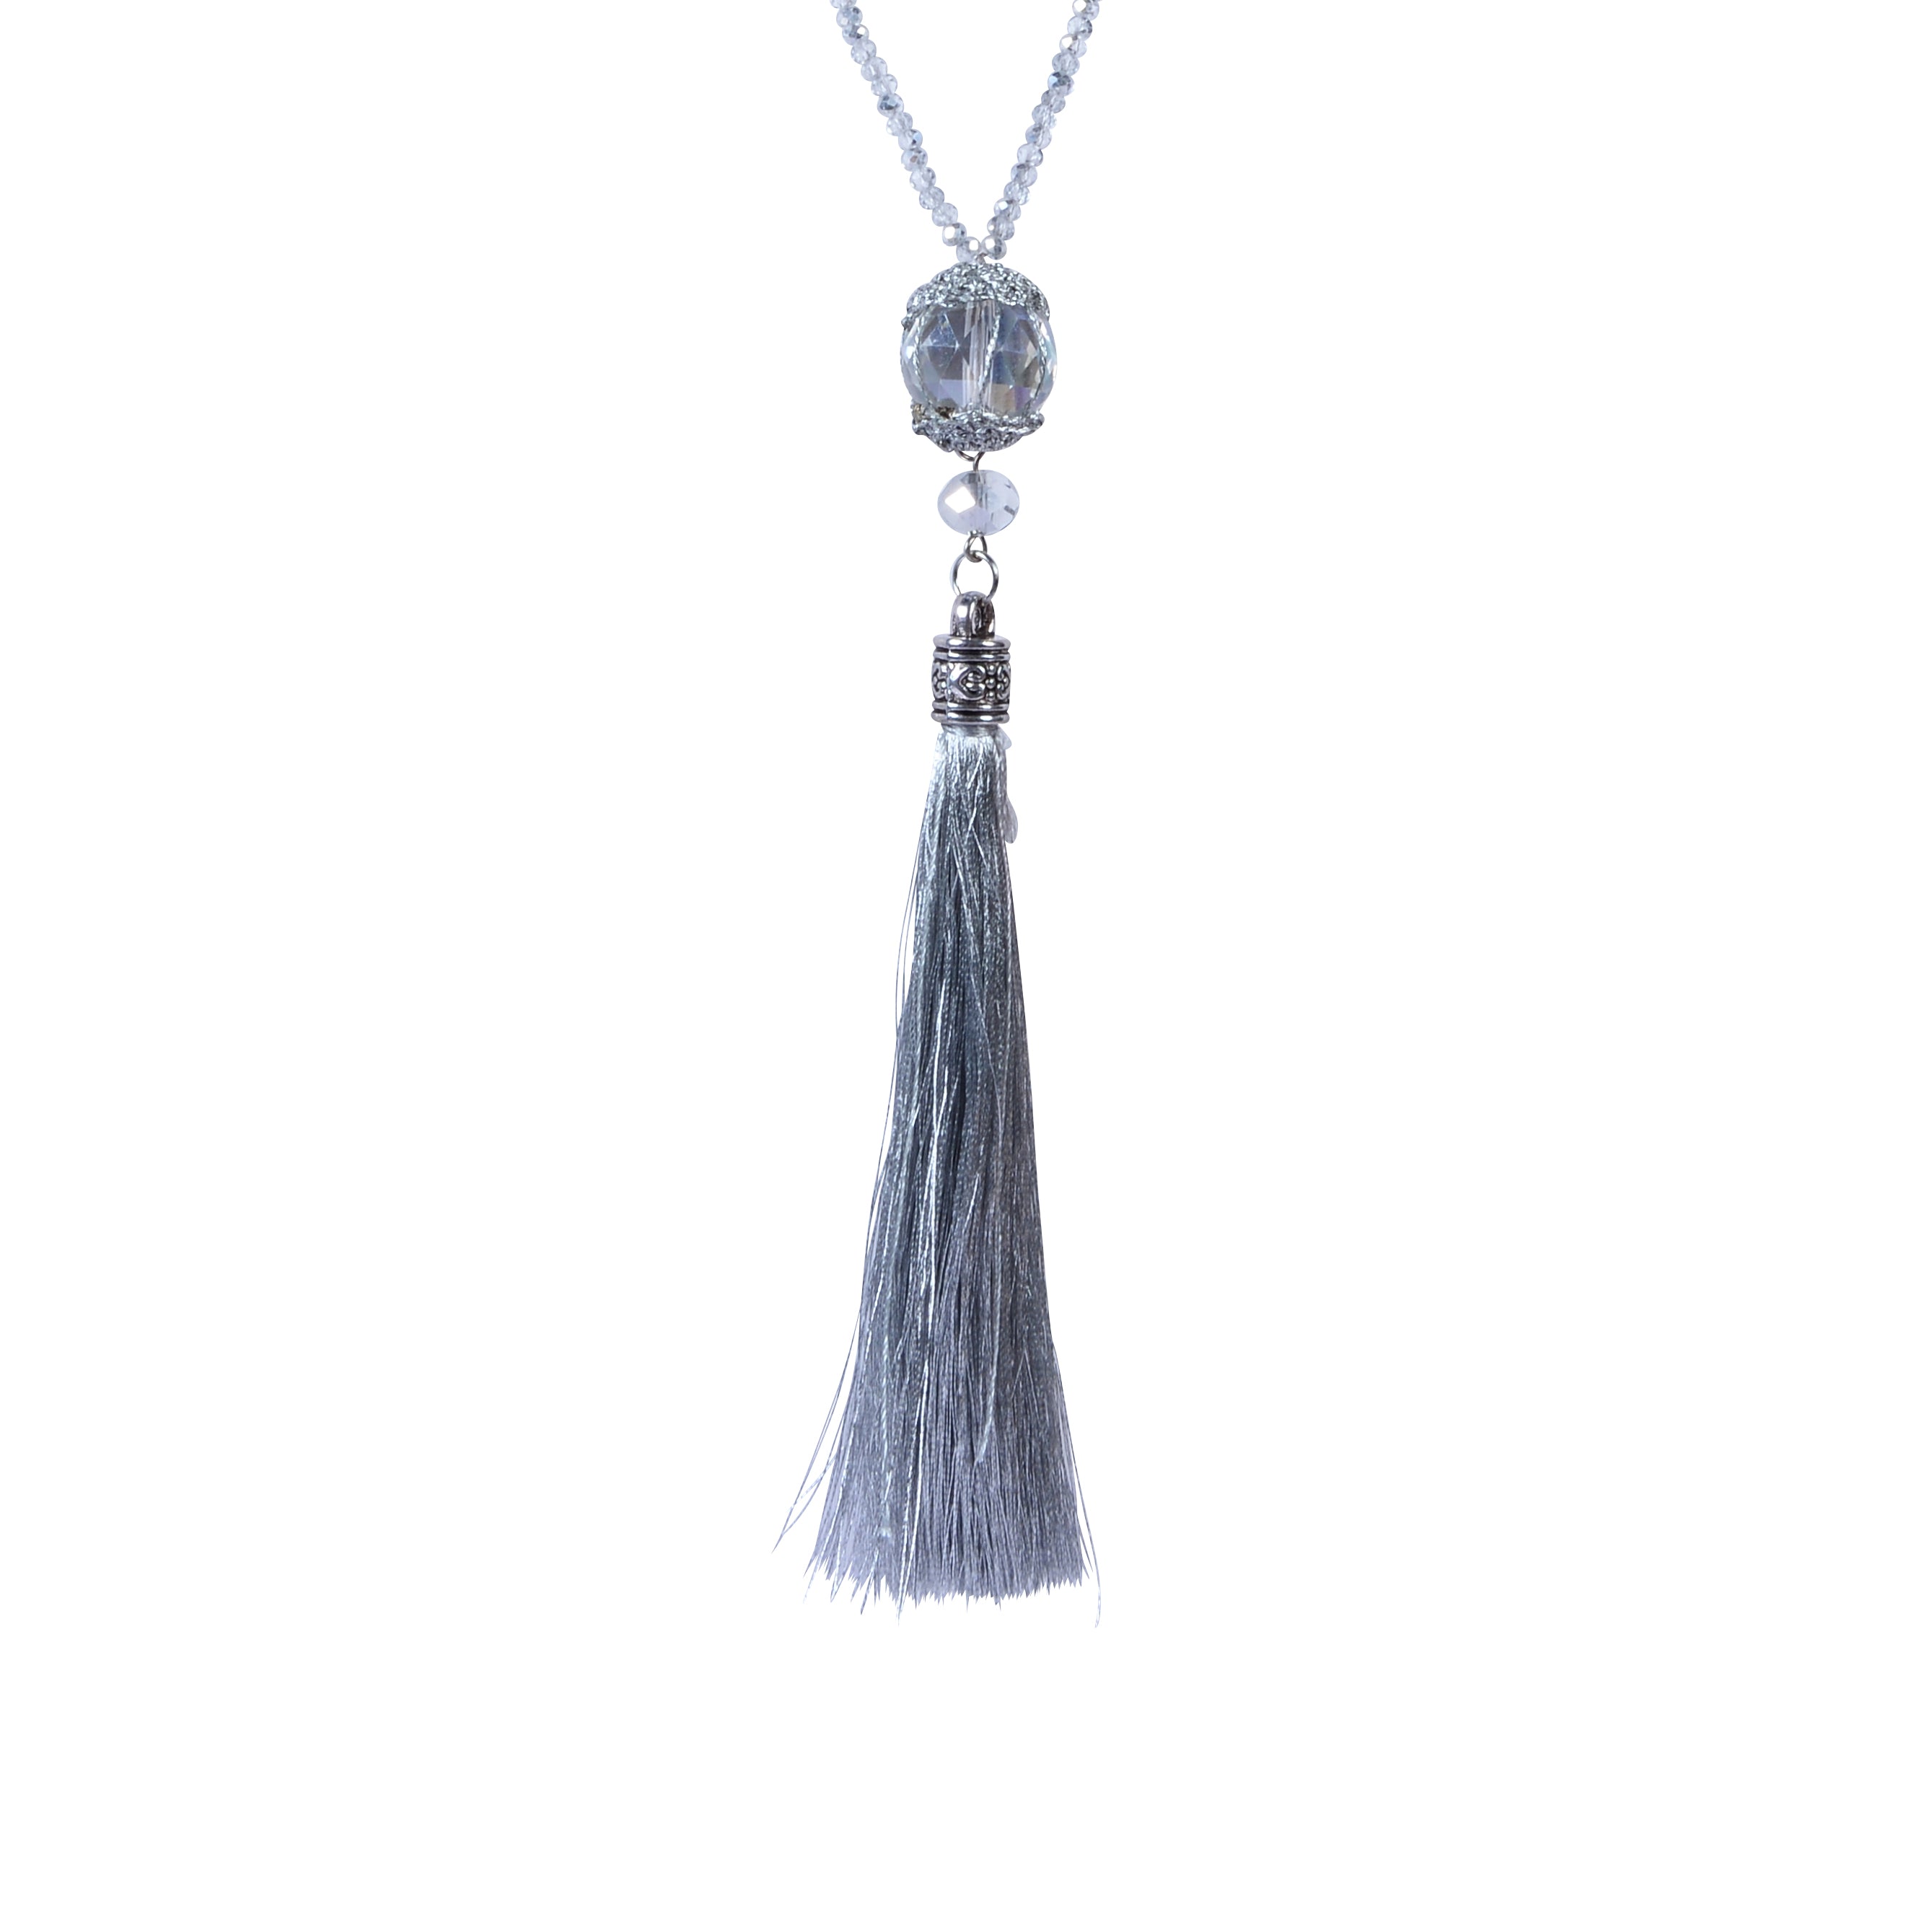 Crystal Beads Tassel Long Chain Pendant Necklaces N2953